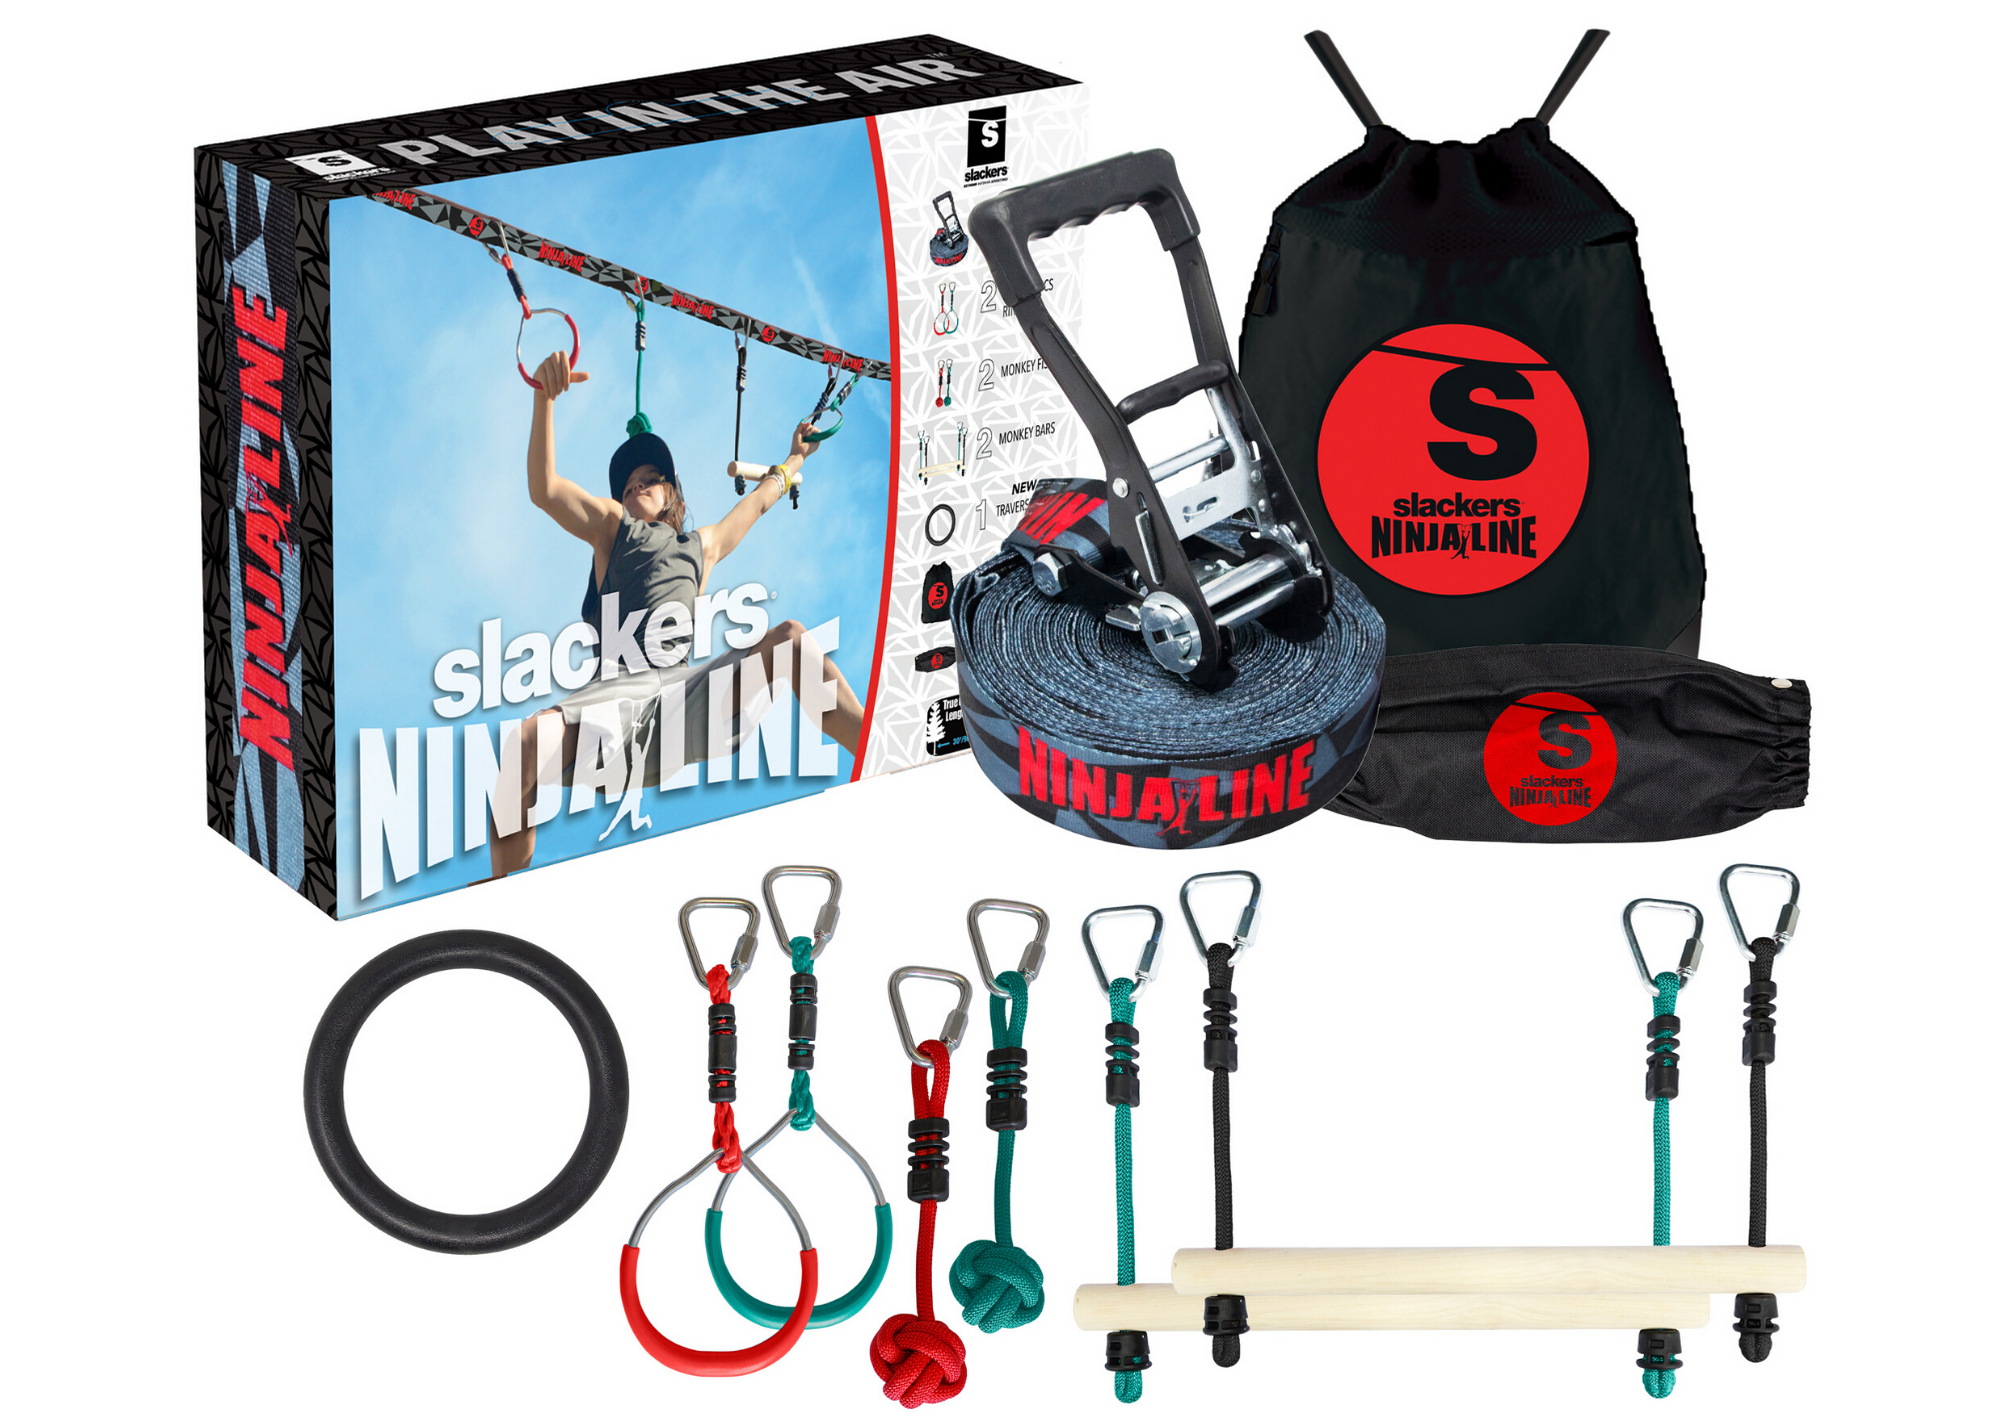 Slackers NinjaLine 36’ Intro Kit with 7 Hanging Obstacles